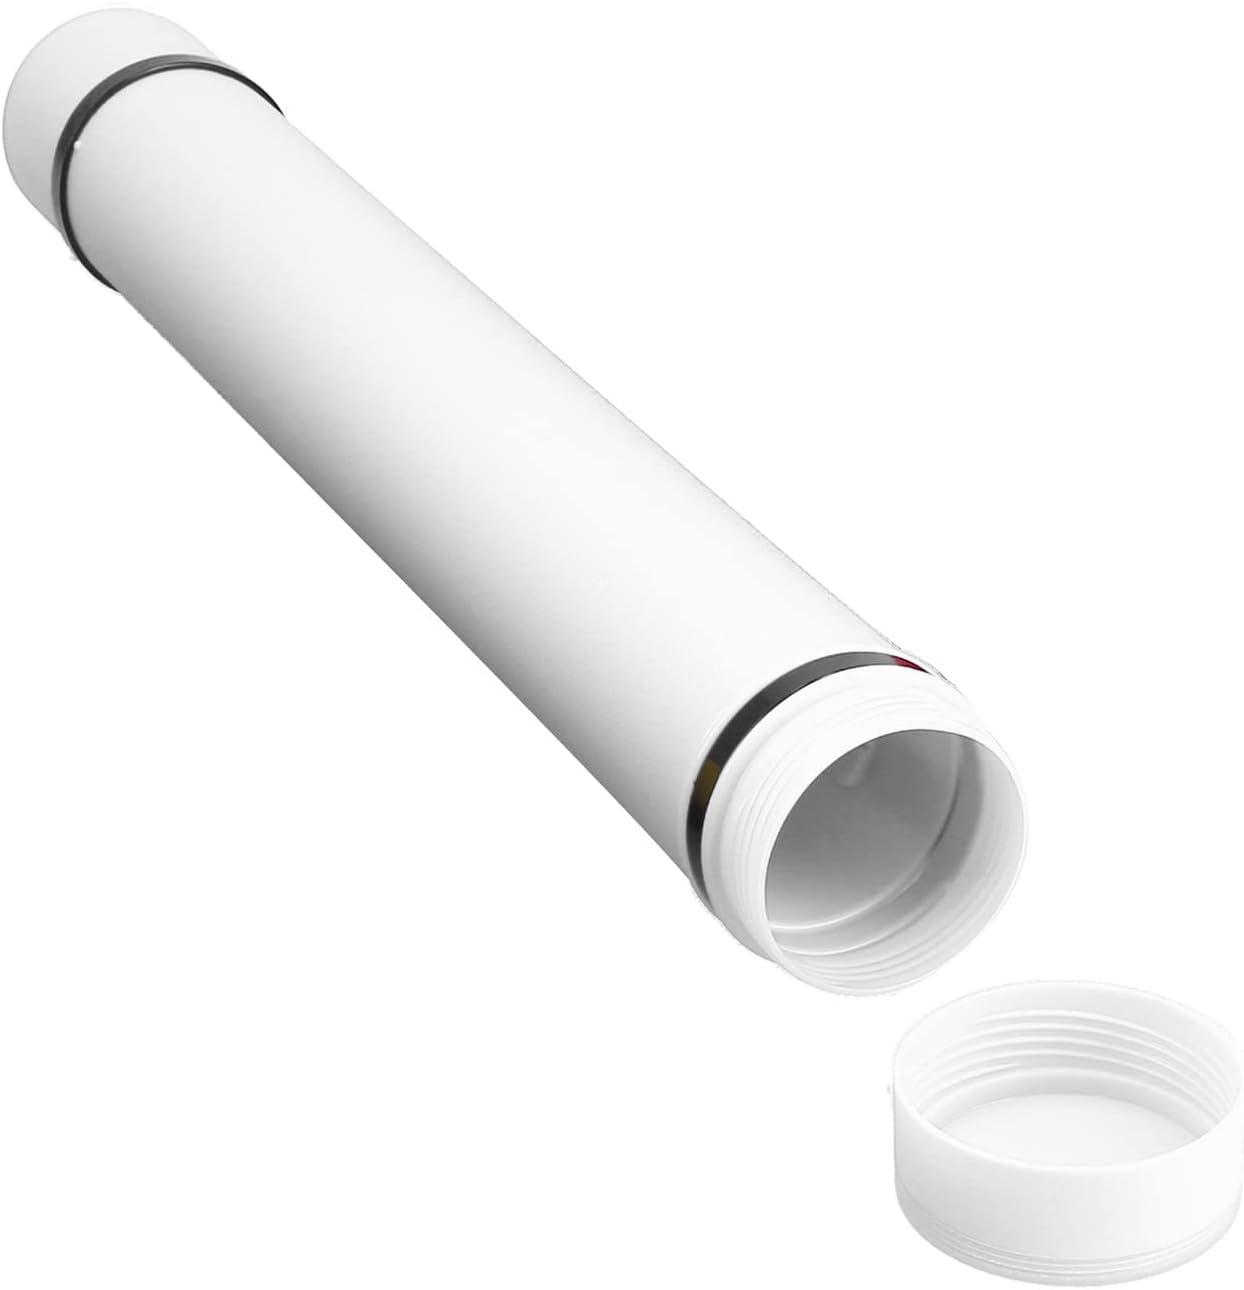  Poster Storage Tube, Large Capacity Document Poster Tube with  Strap for Storage for Travel for Outdoor(White) : Arts, Crafts & Sewing